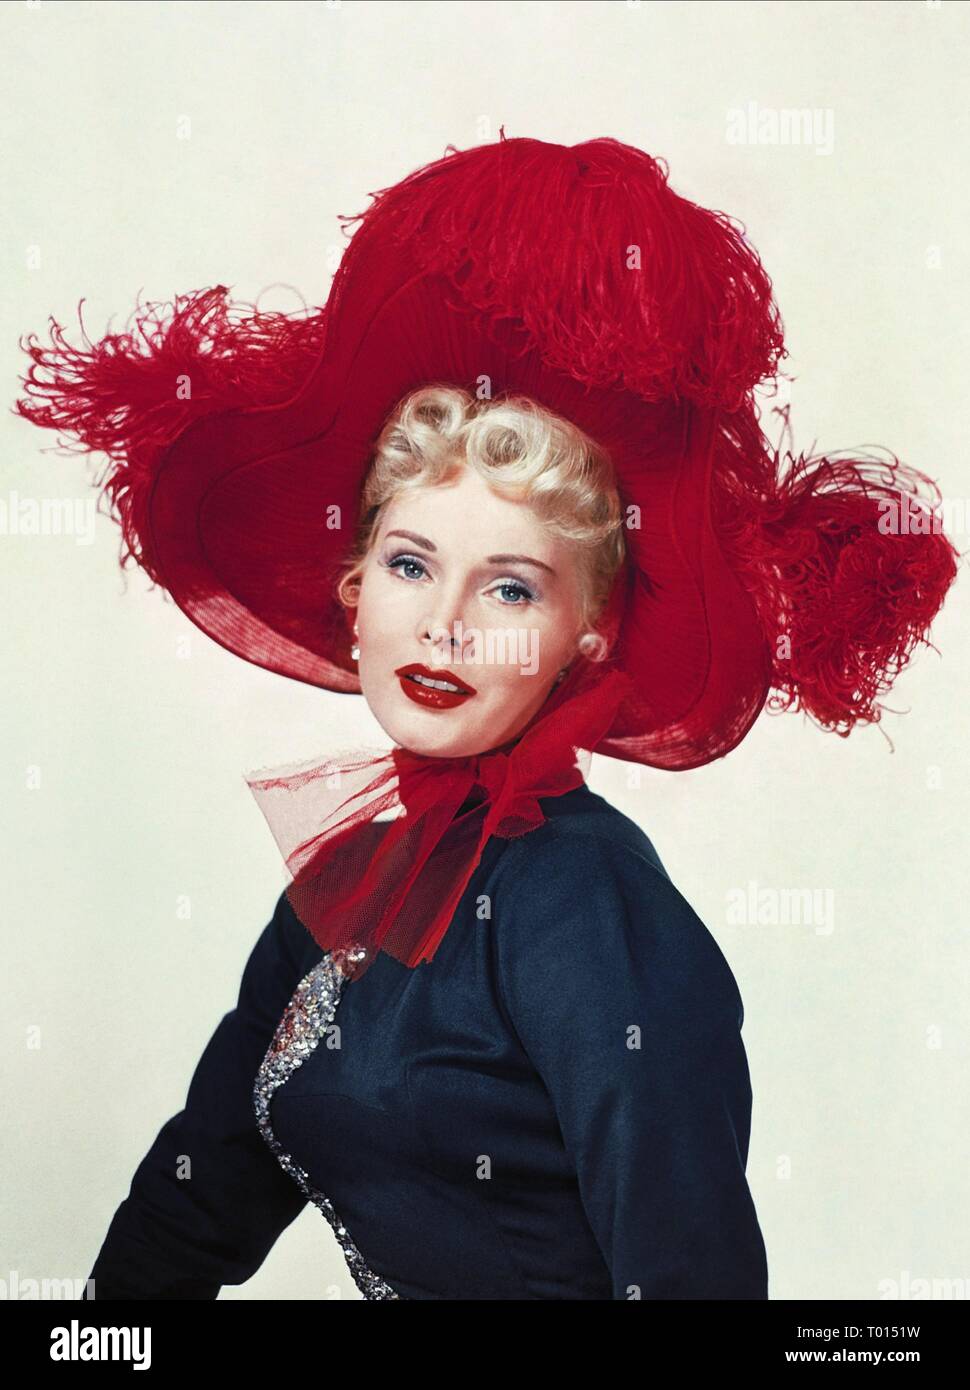 ZSA ZSA GABOR, MOULIN ROUGE, 1952 Stockfoto